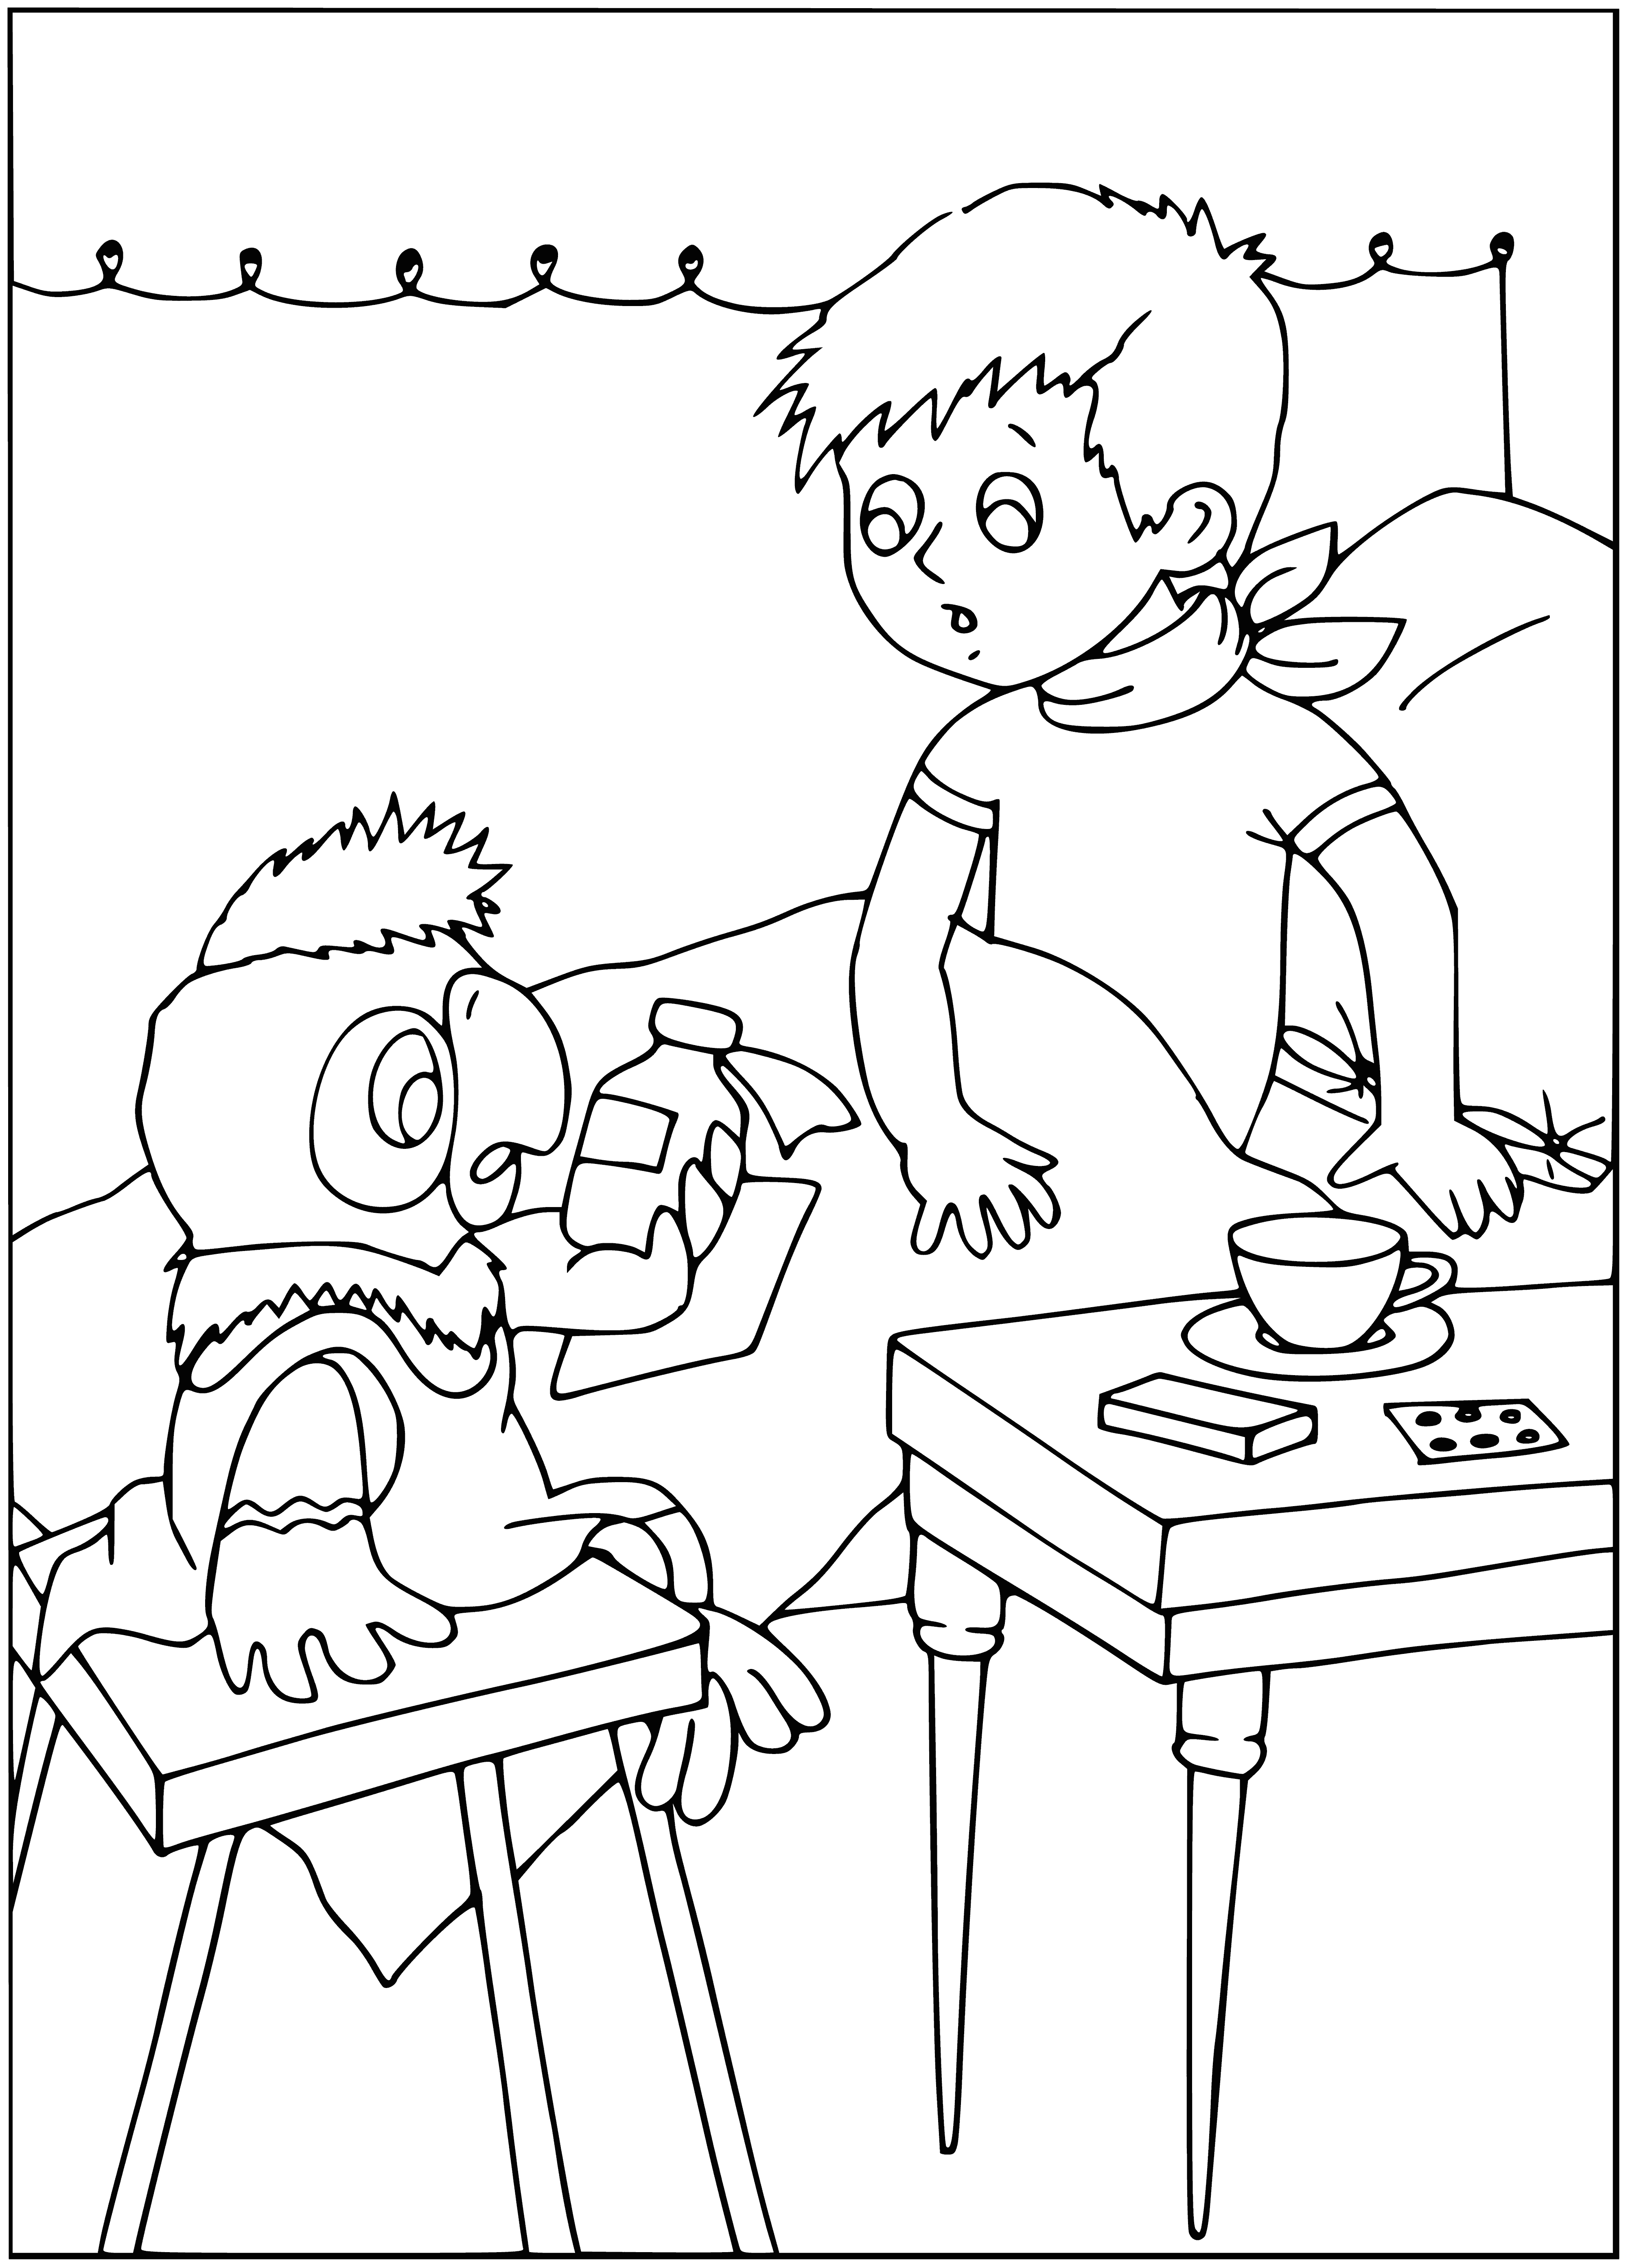 coloring page: Man, woman, parrot and cat all looking at each other.